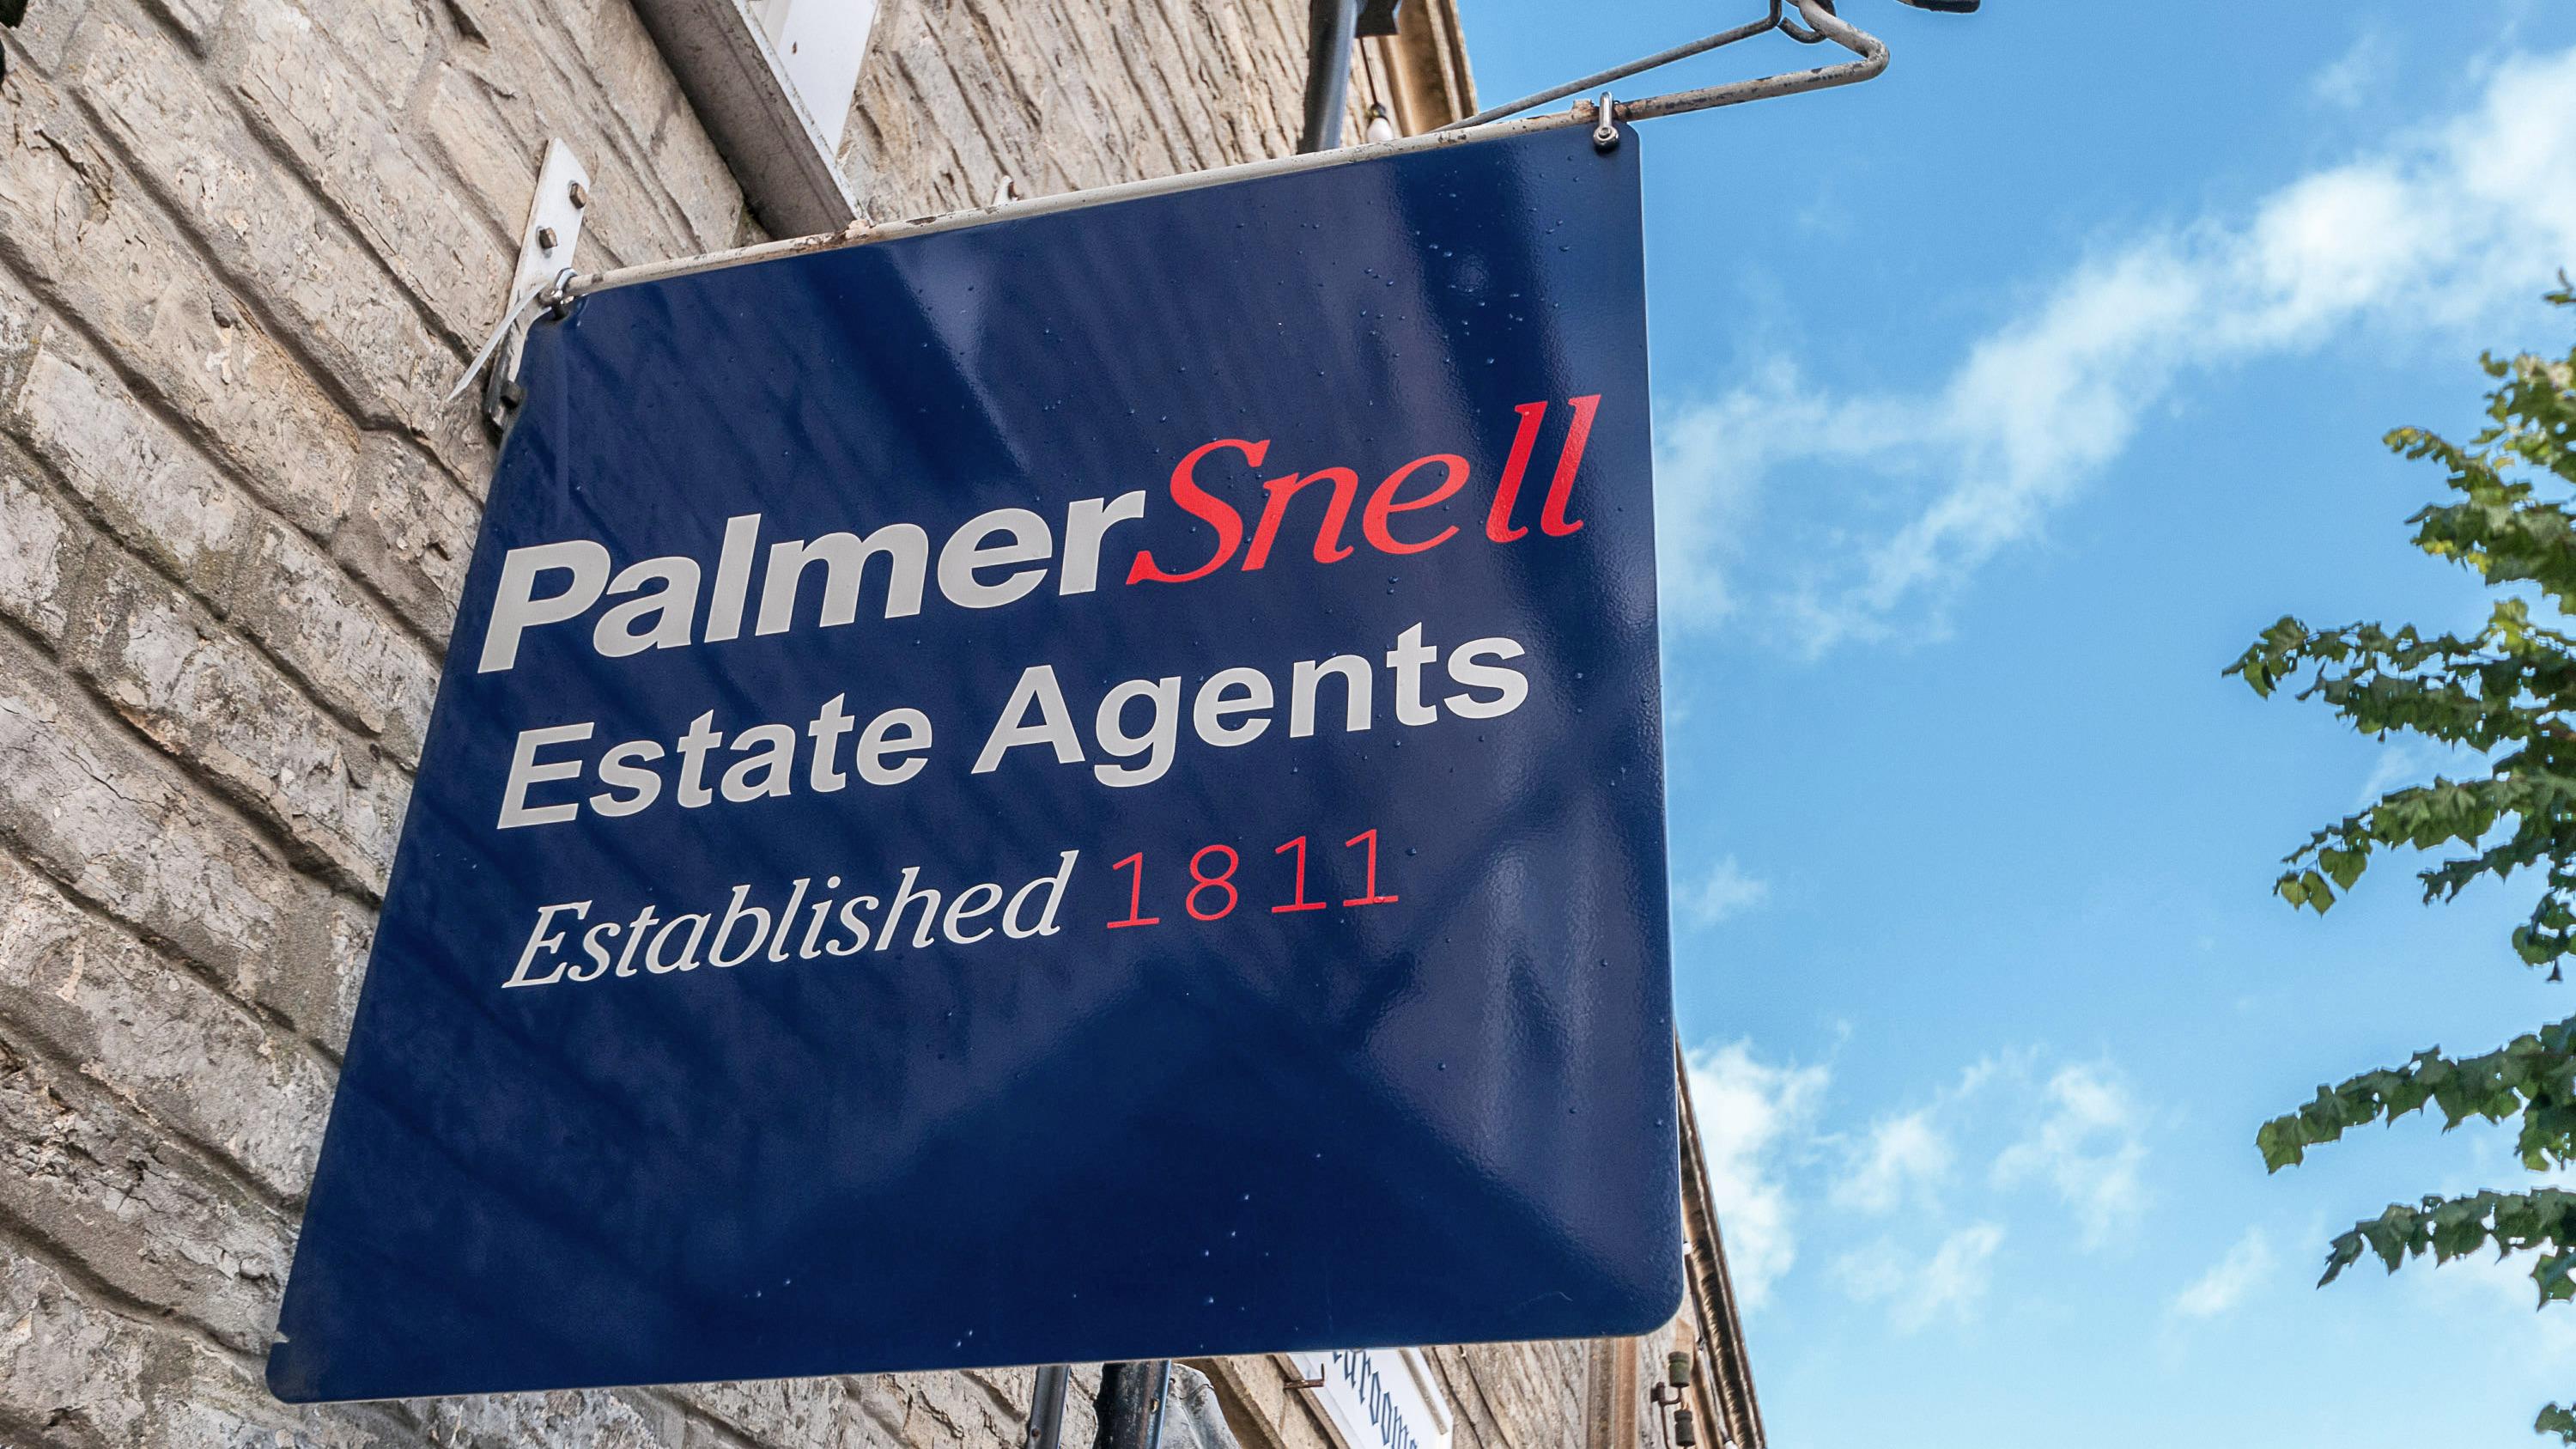 Palmer Snell Sales and Letting Agents Yeovil Yeovil 01935 250235